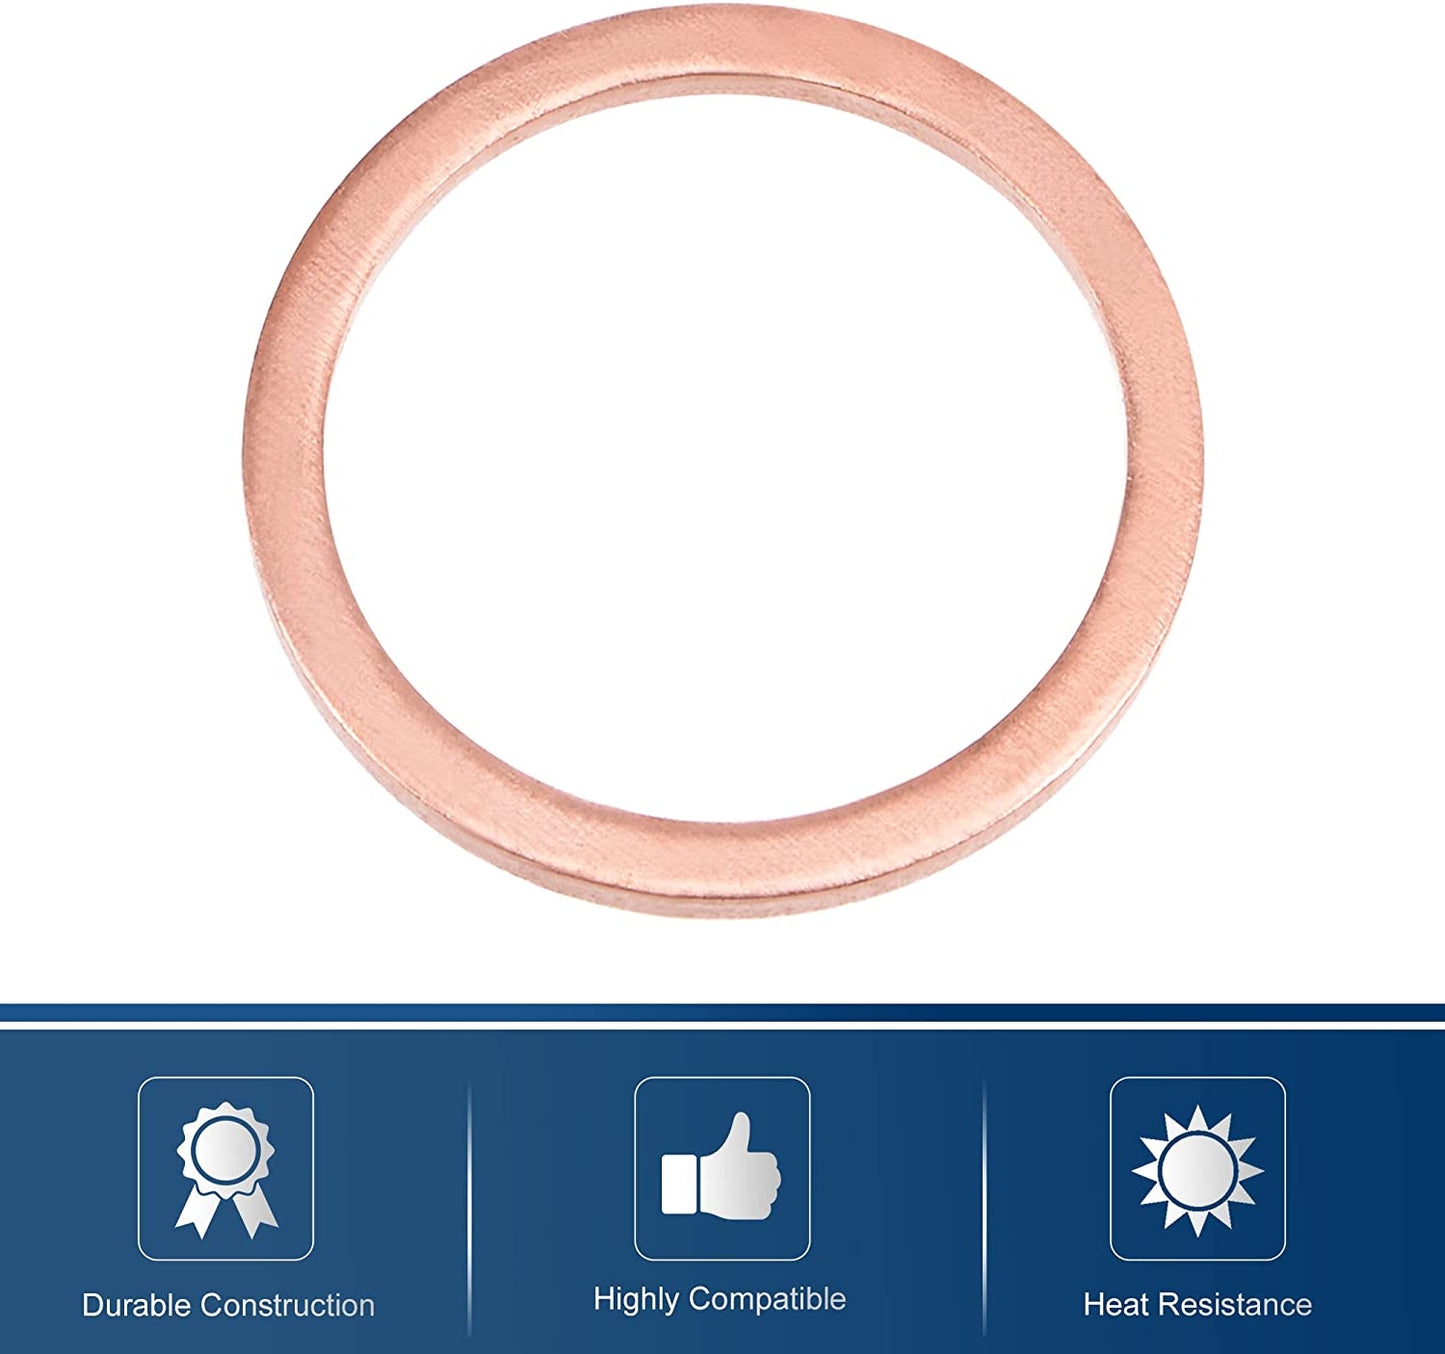 250pcs Metric M18x22x1.5mm Copper flat washer gasket Copper crush washer Sealing Ring for Screw Bolt Nut